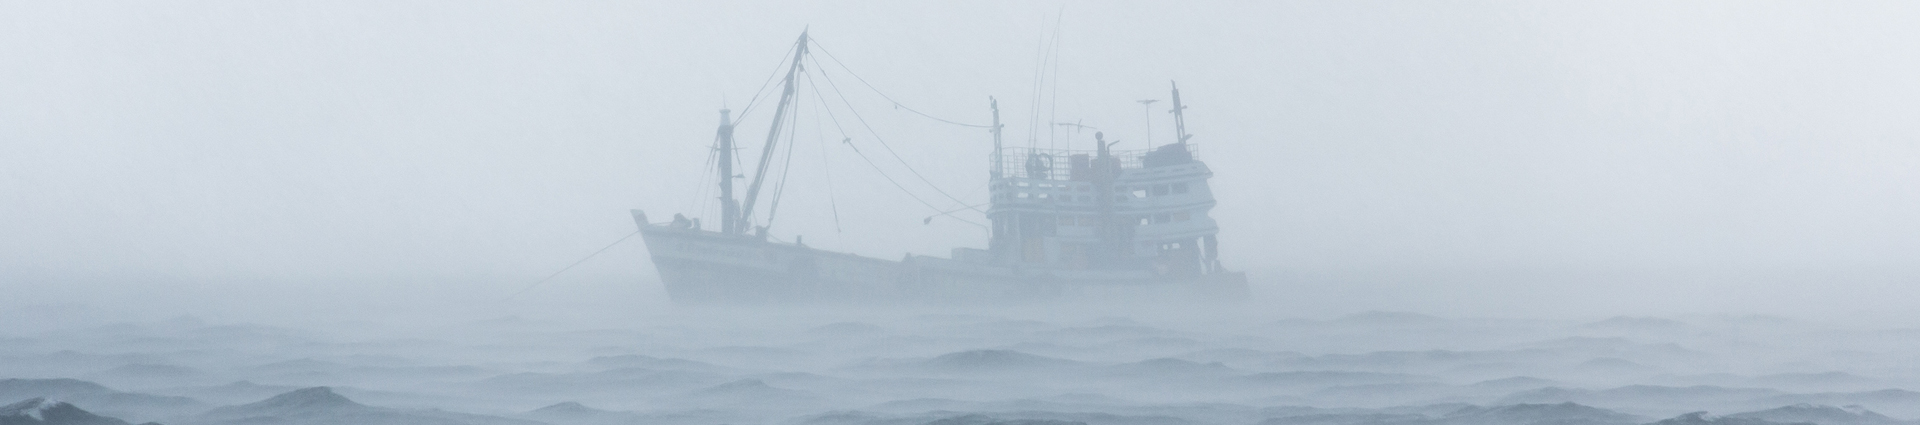 Ship in foggy weather